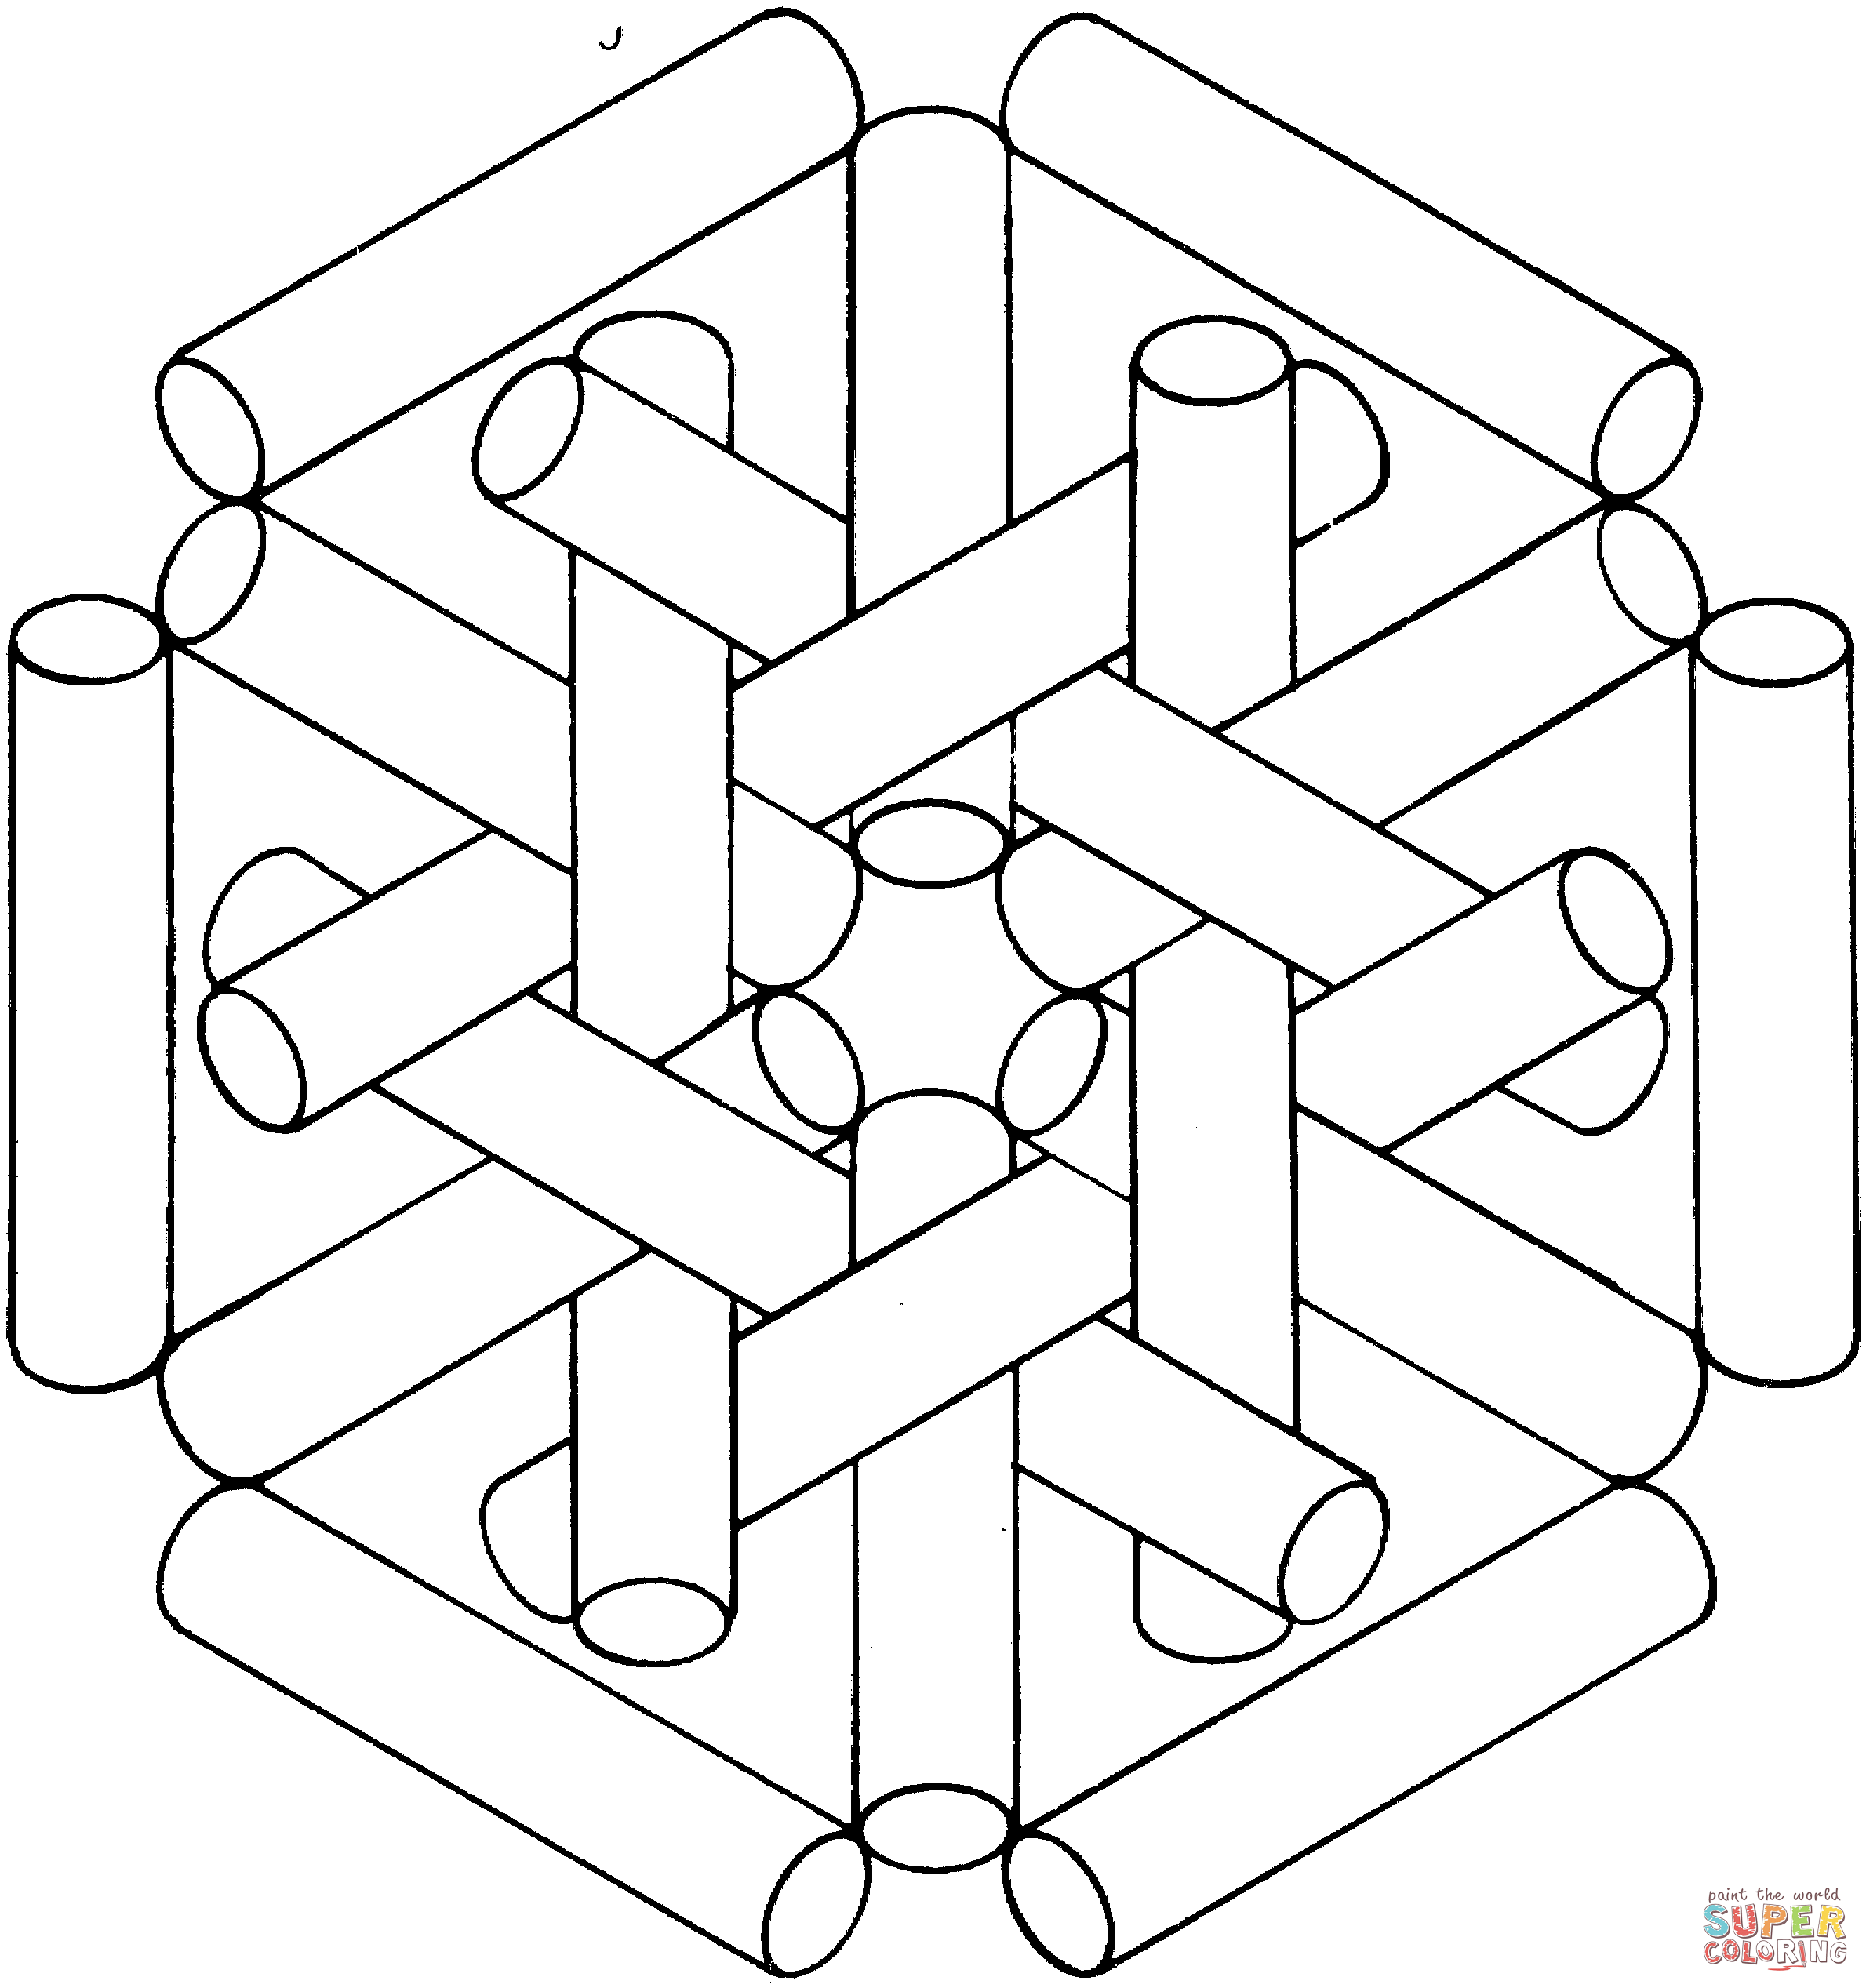 coloring pages optical illusions optical illusion 17 coloring page free printable coloring illusions pages optical 